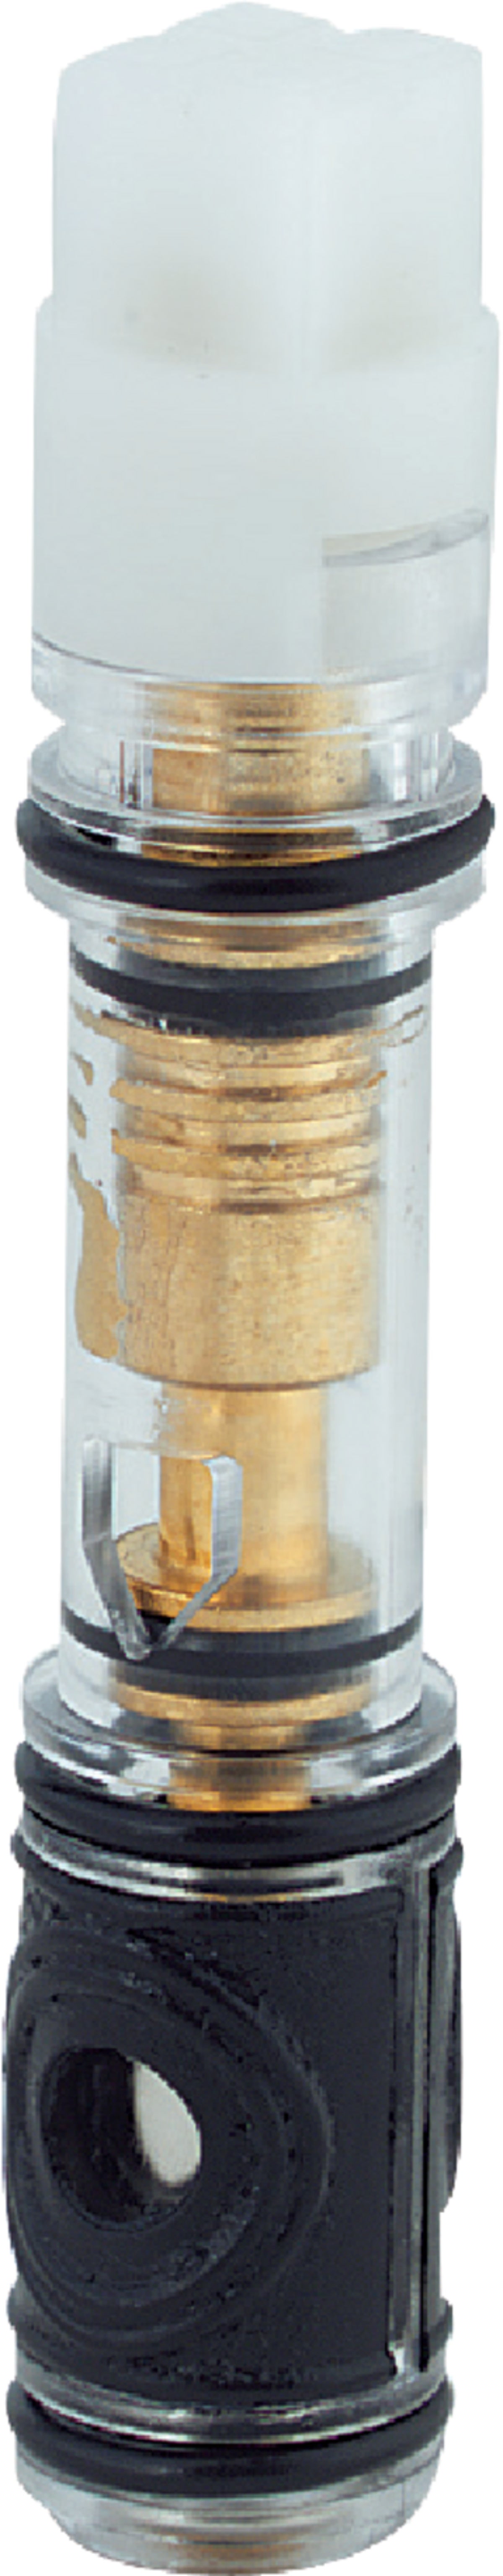 for Use with Moen Single Control Faucets Keeney Manufacturing PP808-58LF Plumb Pak Cartridge 